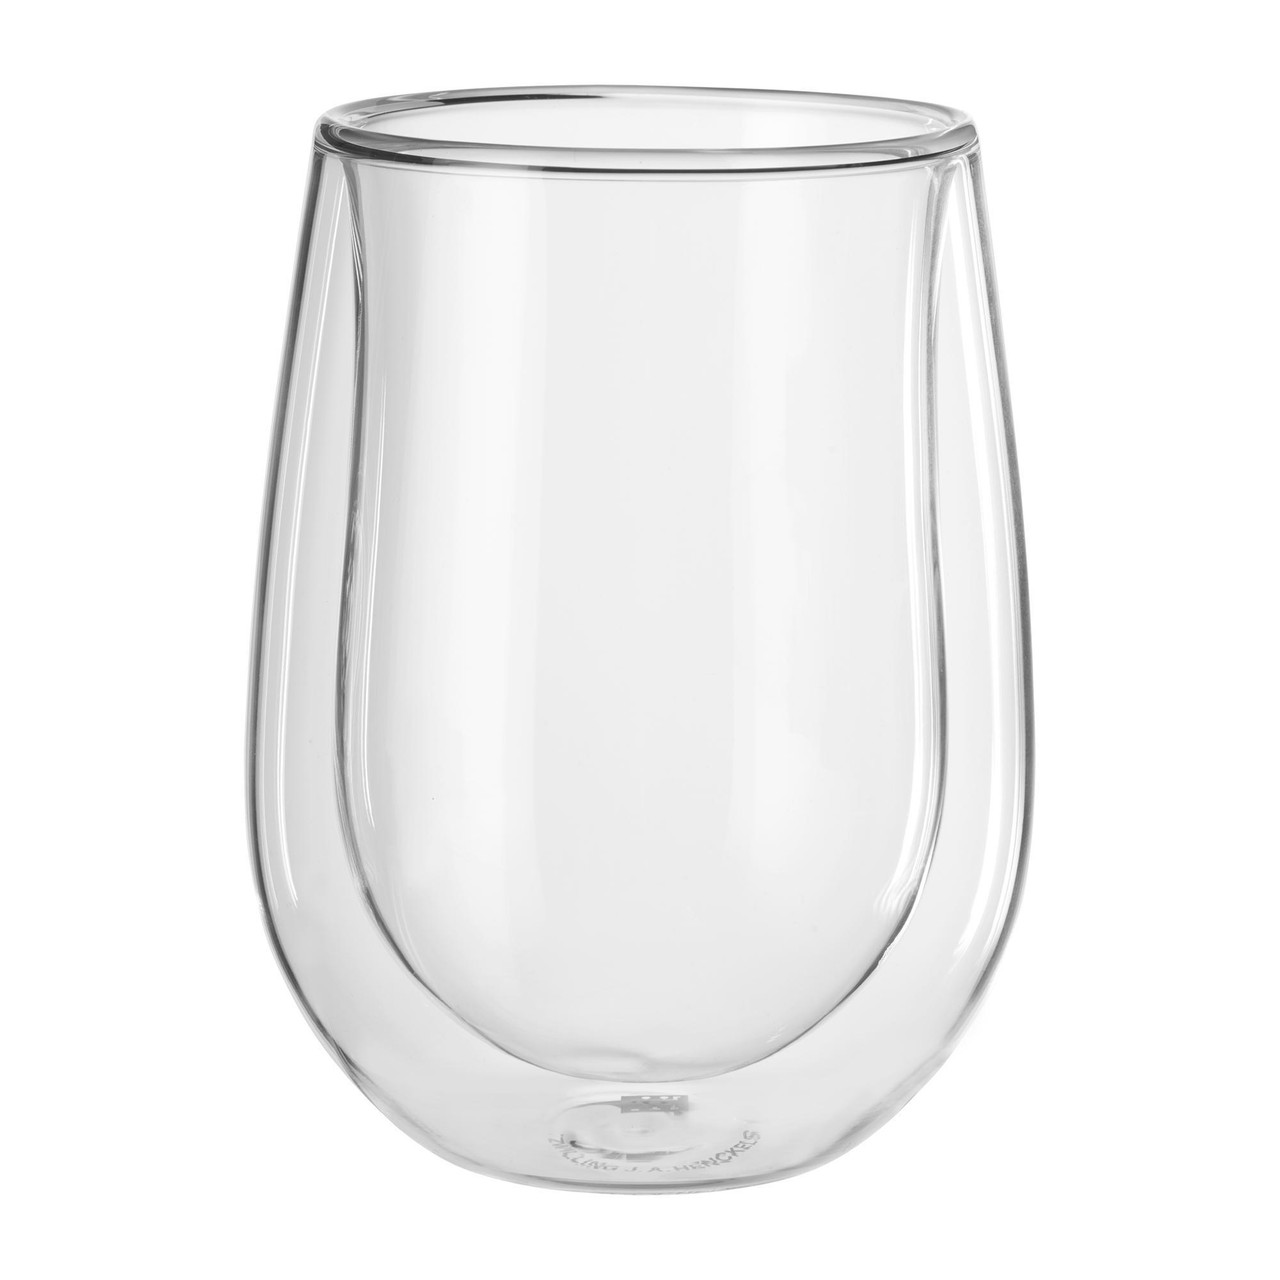 ZWILLING Sorrento Double Wall Whiskey Glass - Set of 2 (Clear)